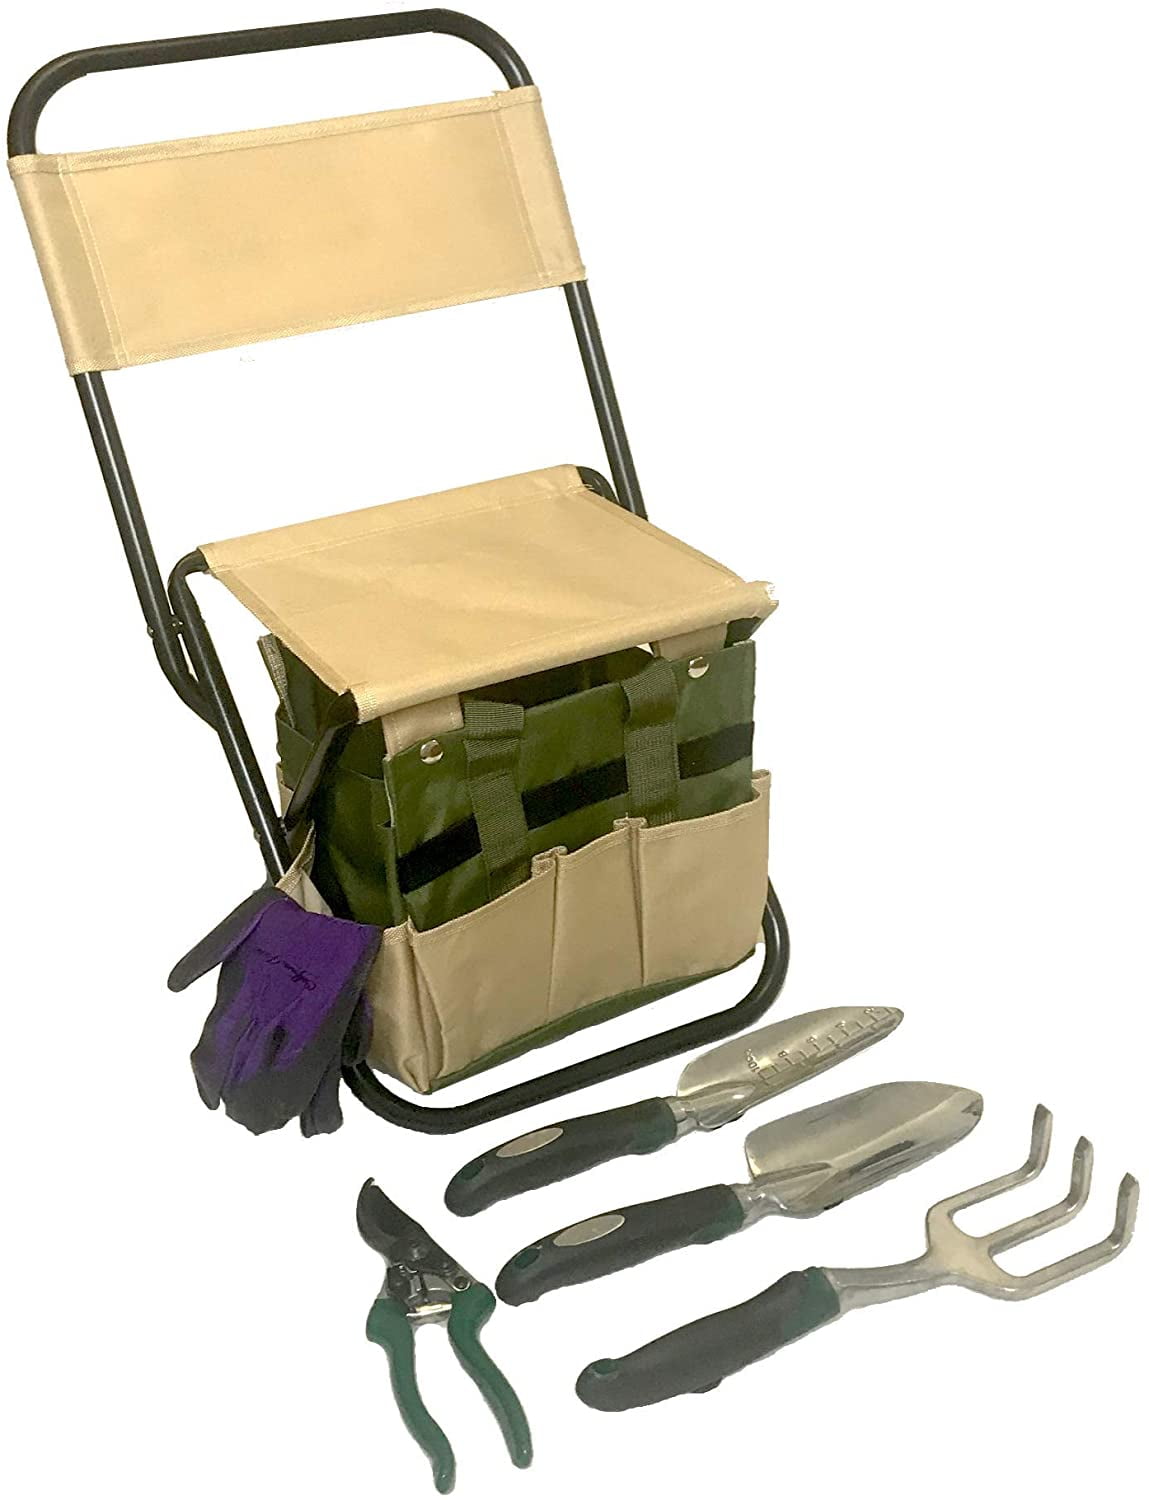 Folding Storage Stool Seat In Canvas With Gardening Tool Bag 